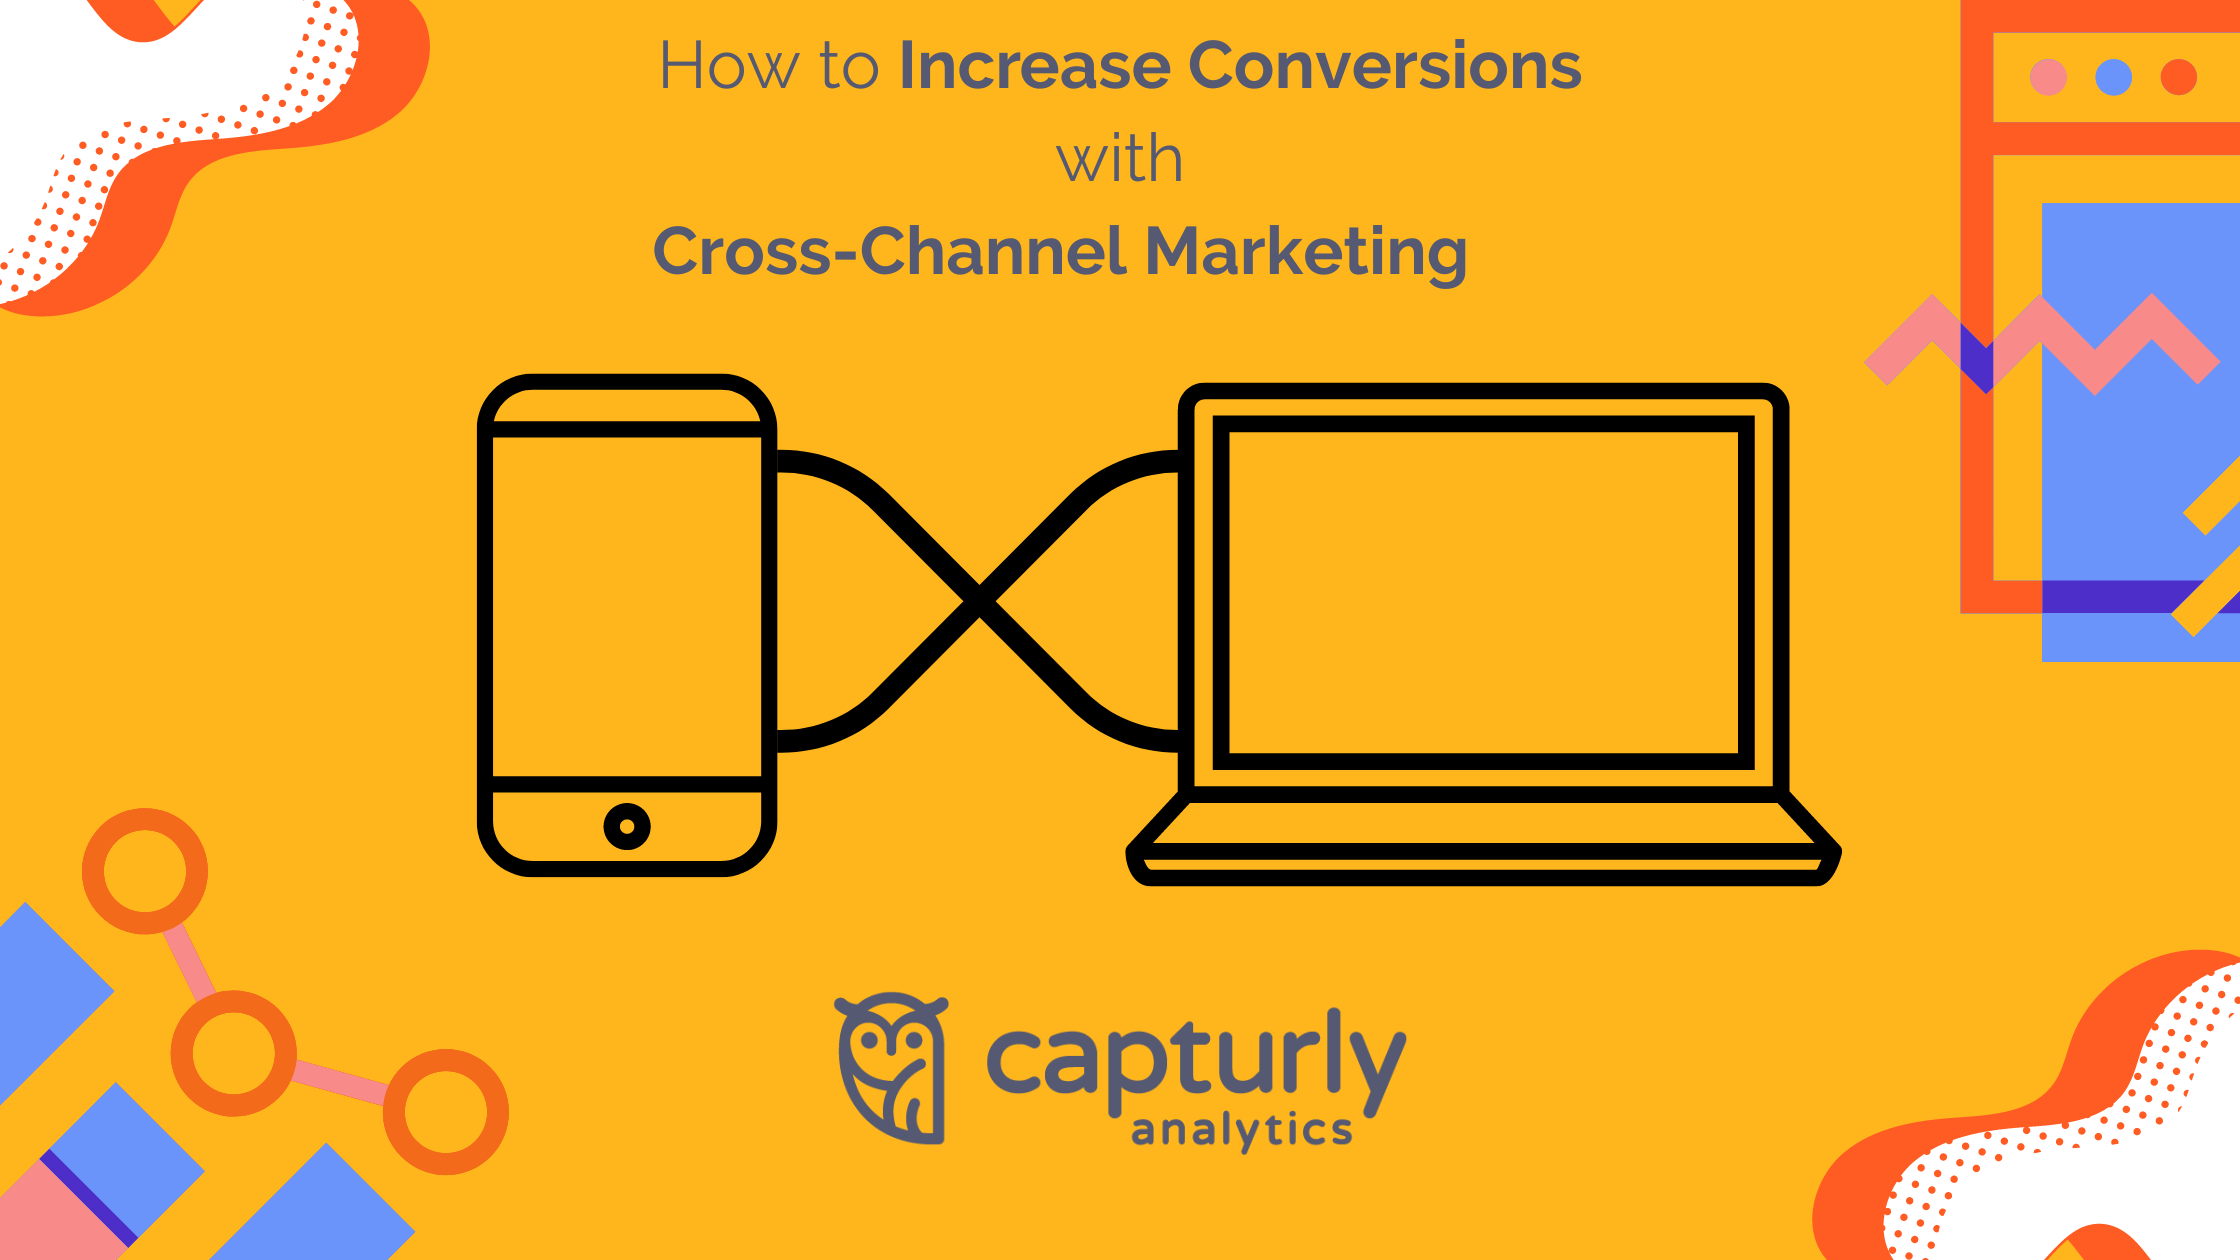 How to Increase Conversions with Cross-Channel Marketing